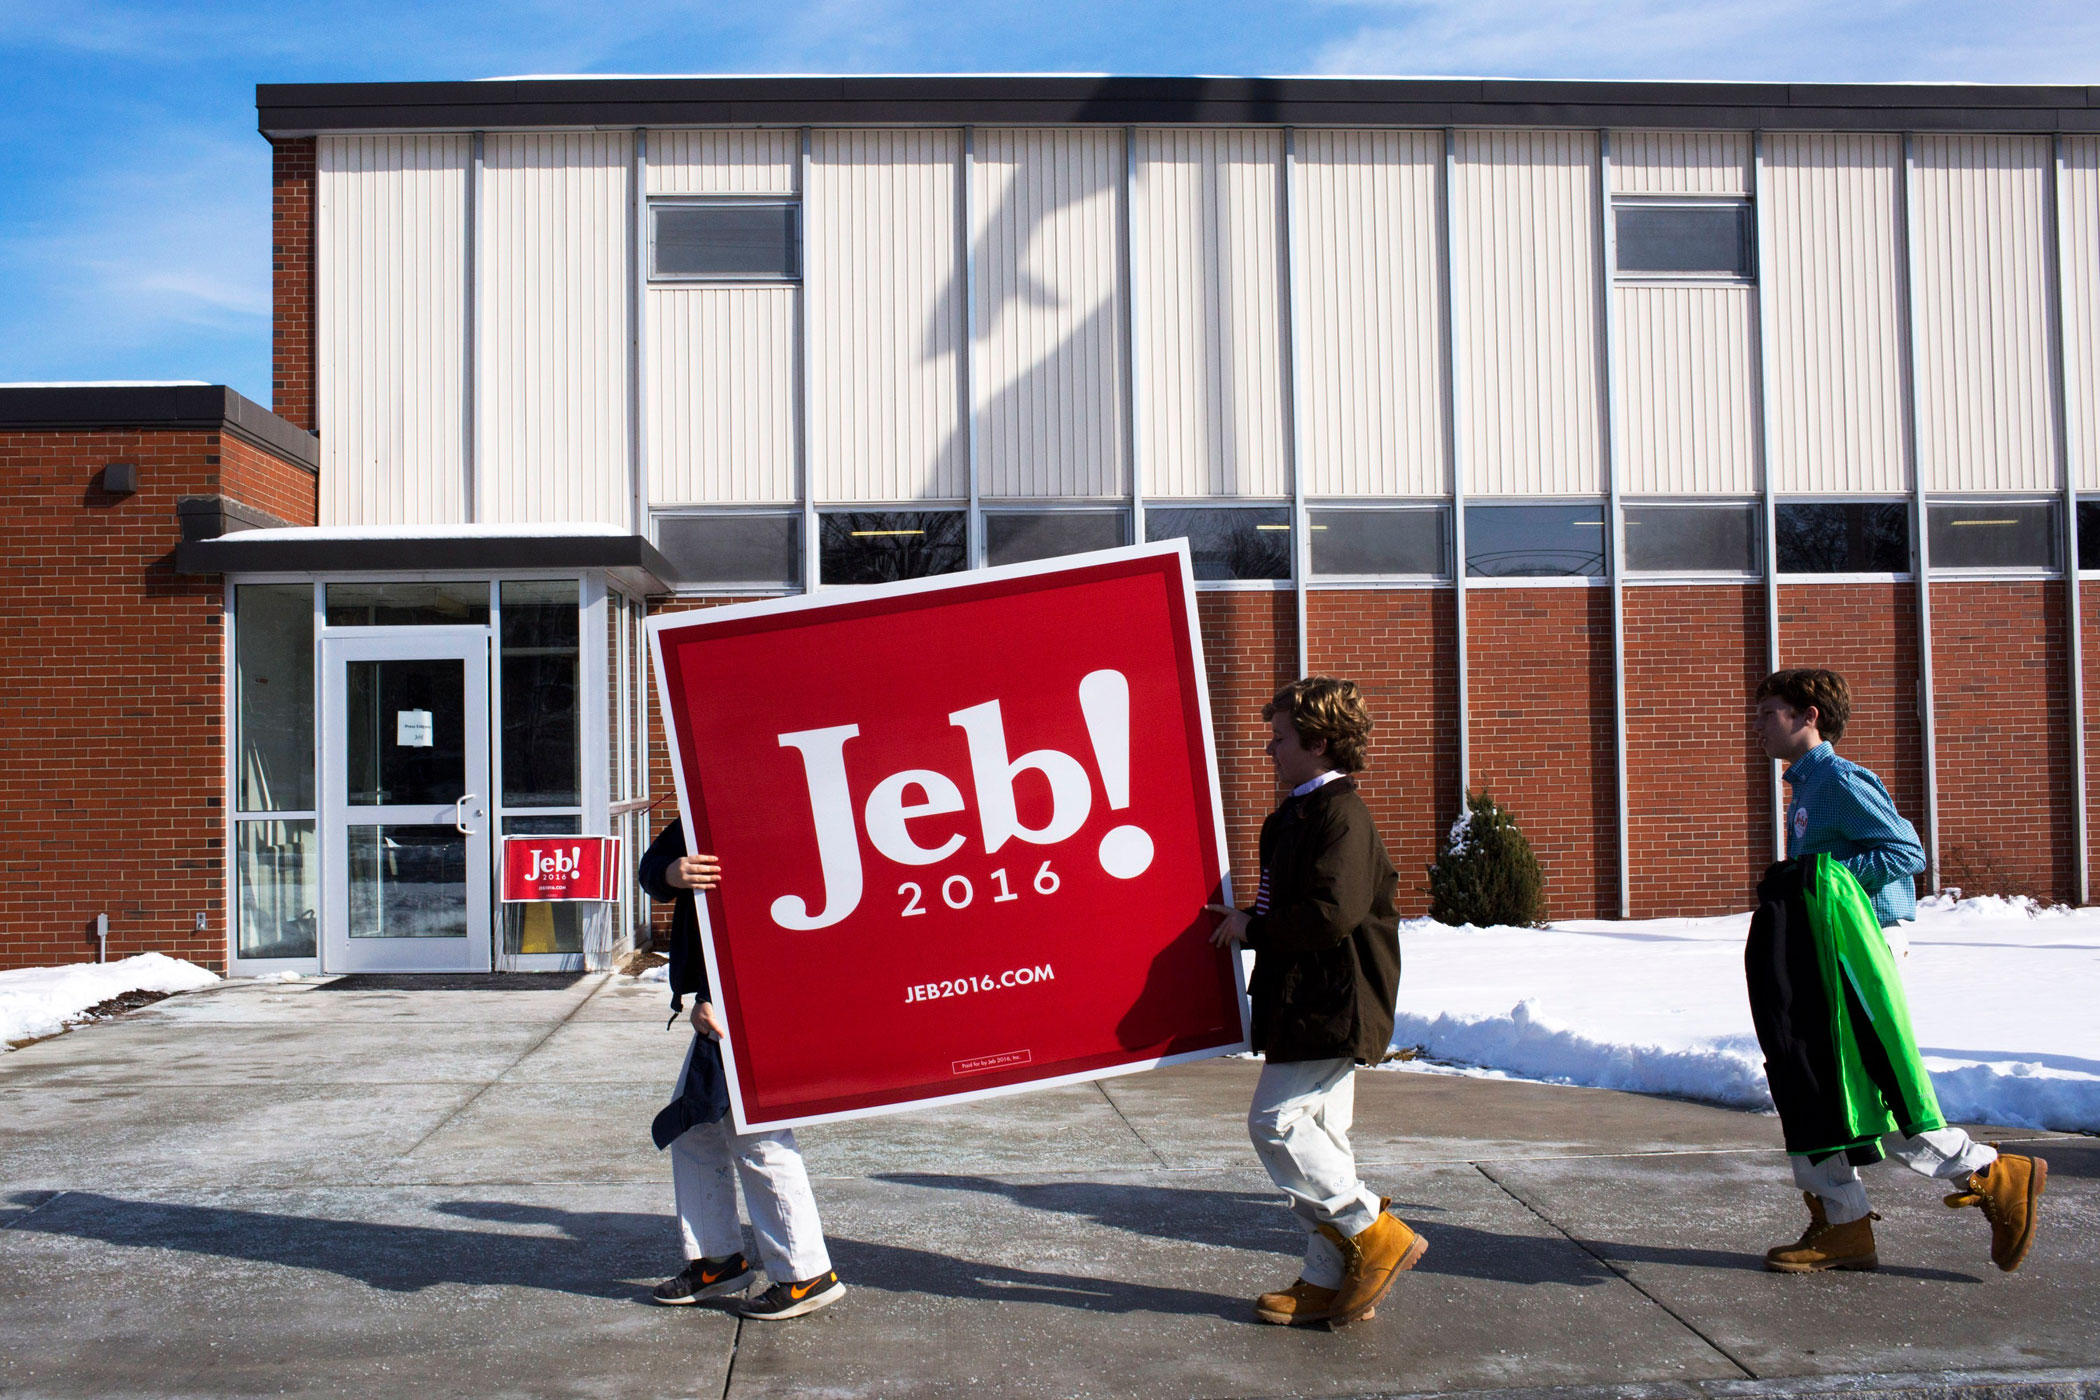 Supporters of former Florida governor Jeb Bush attend a town-hall event at the McKelvie Intermediate School in Bedford, N.H., on Feb. 6, 2016. (Natalie Keyssar for TIME)